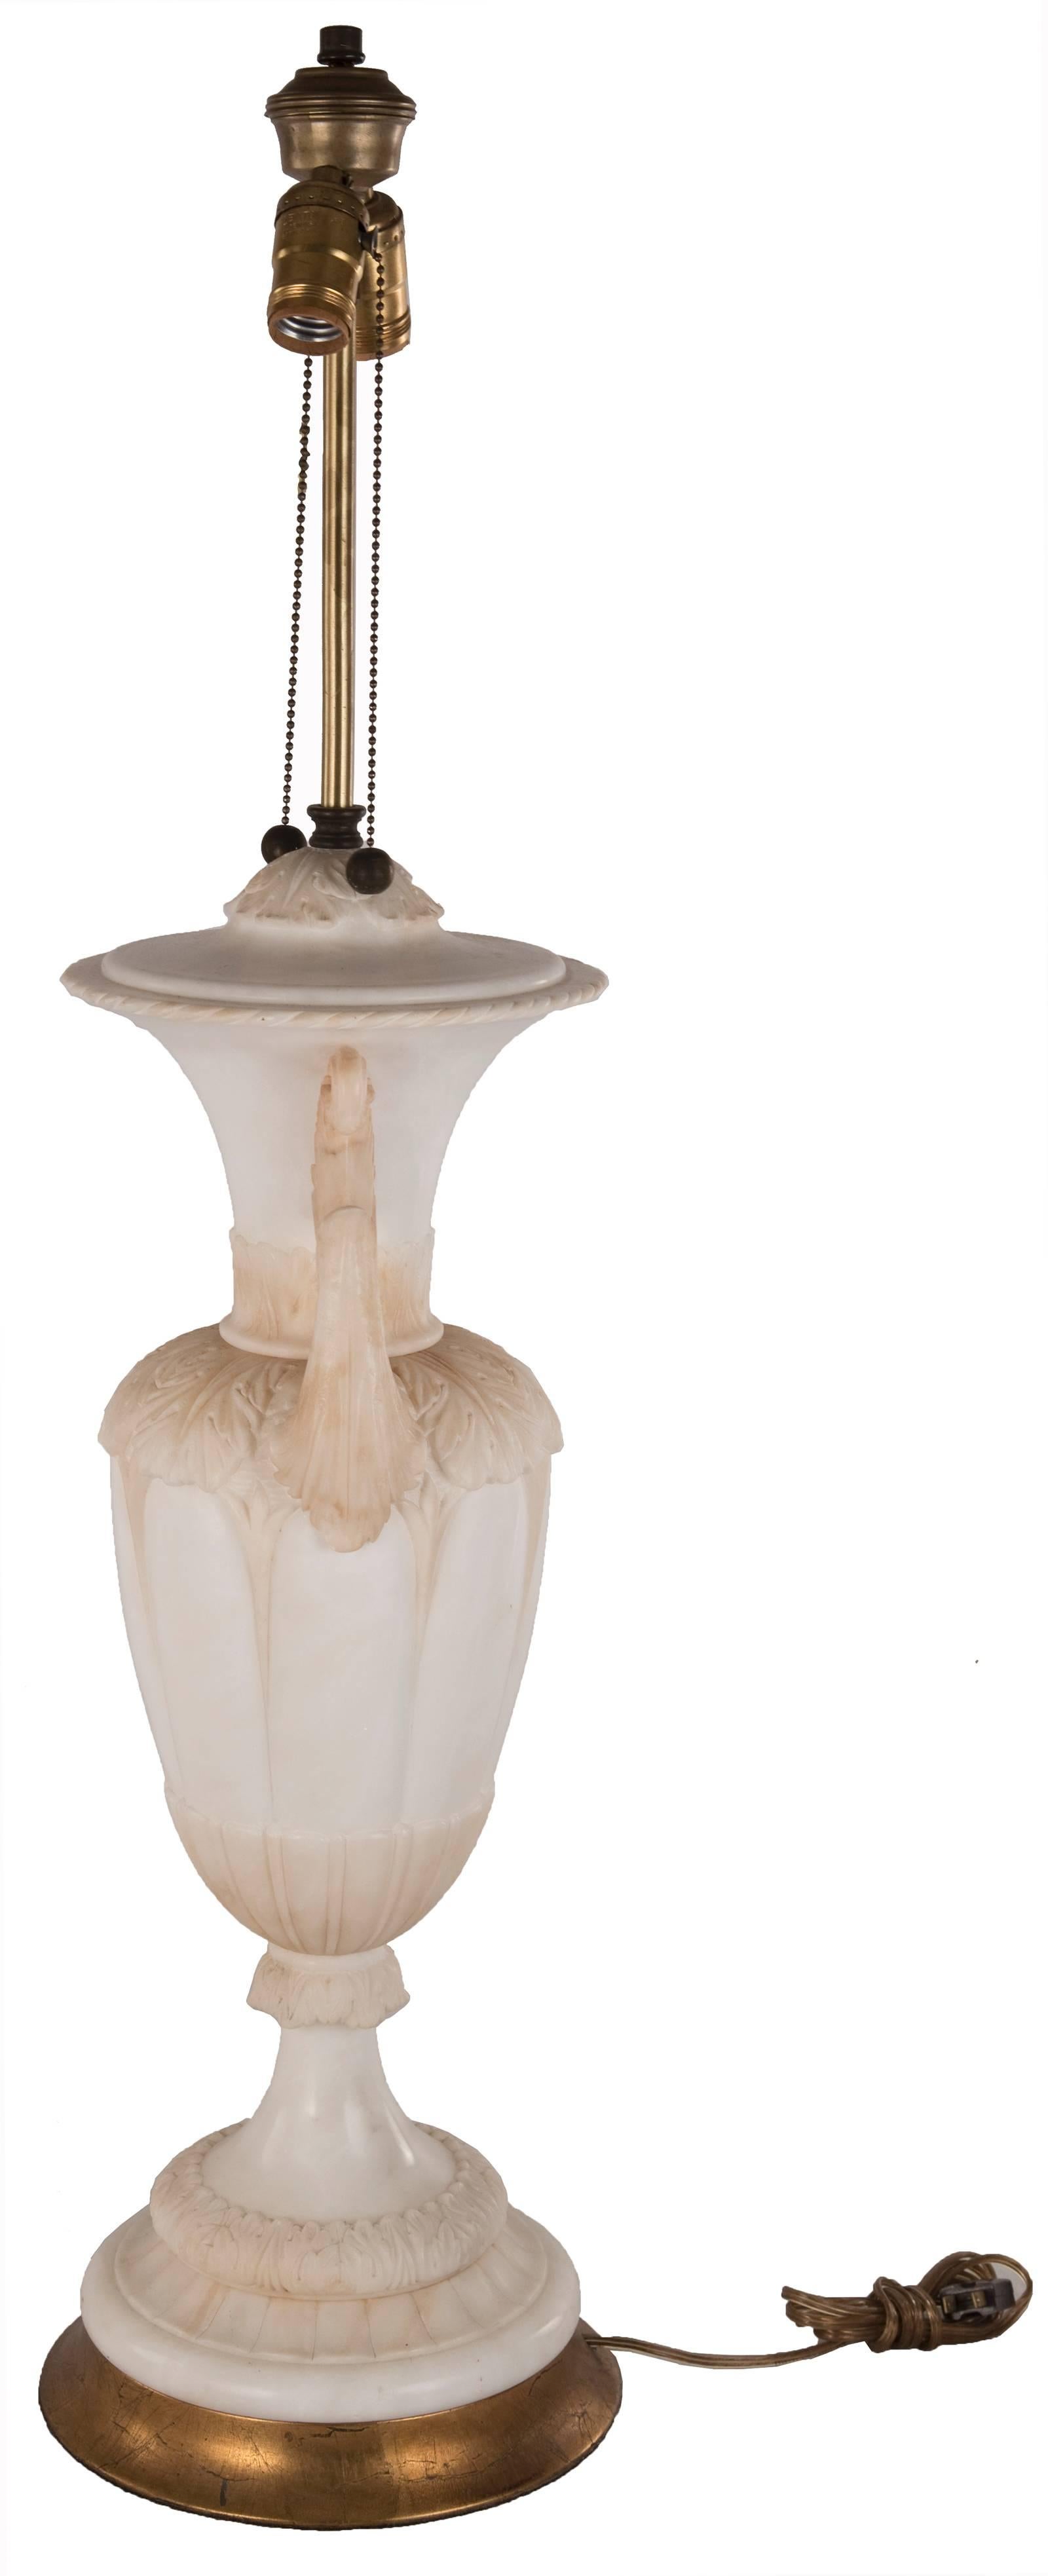 Neoclassical Revival 19th Century Neoclassical Carved Alabaster Urn Table Lamp